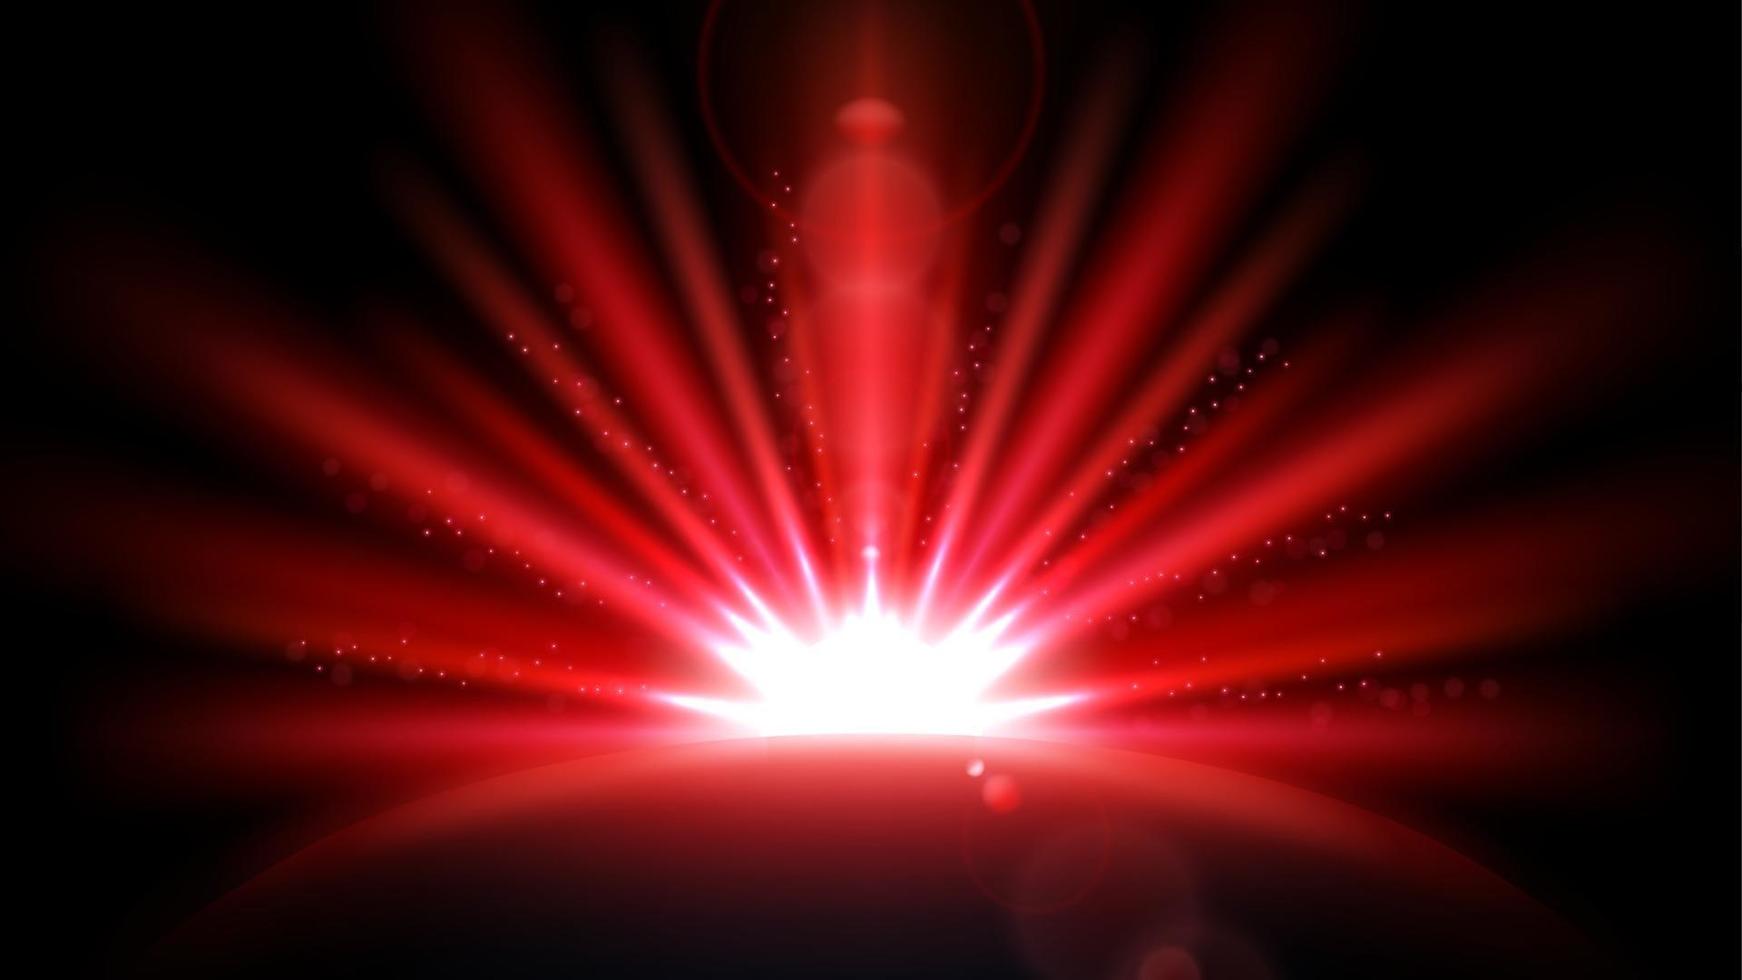 Red Rays with Lens Flare isolated on Black Background. Widescreen Resolution Vector Illustration